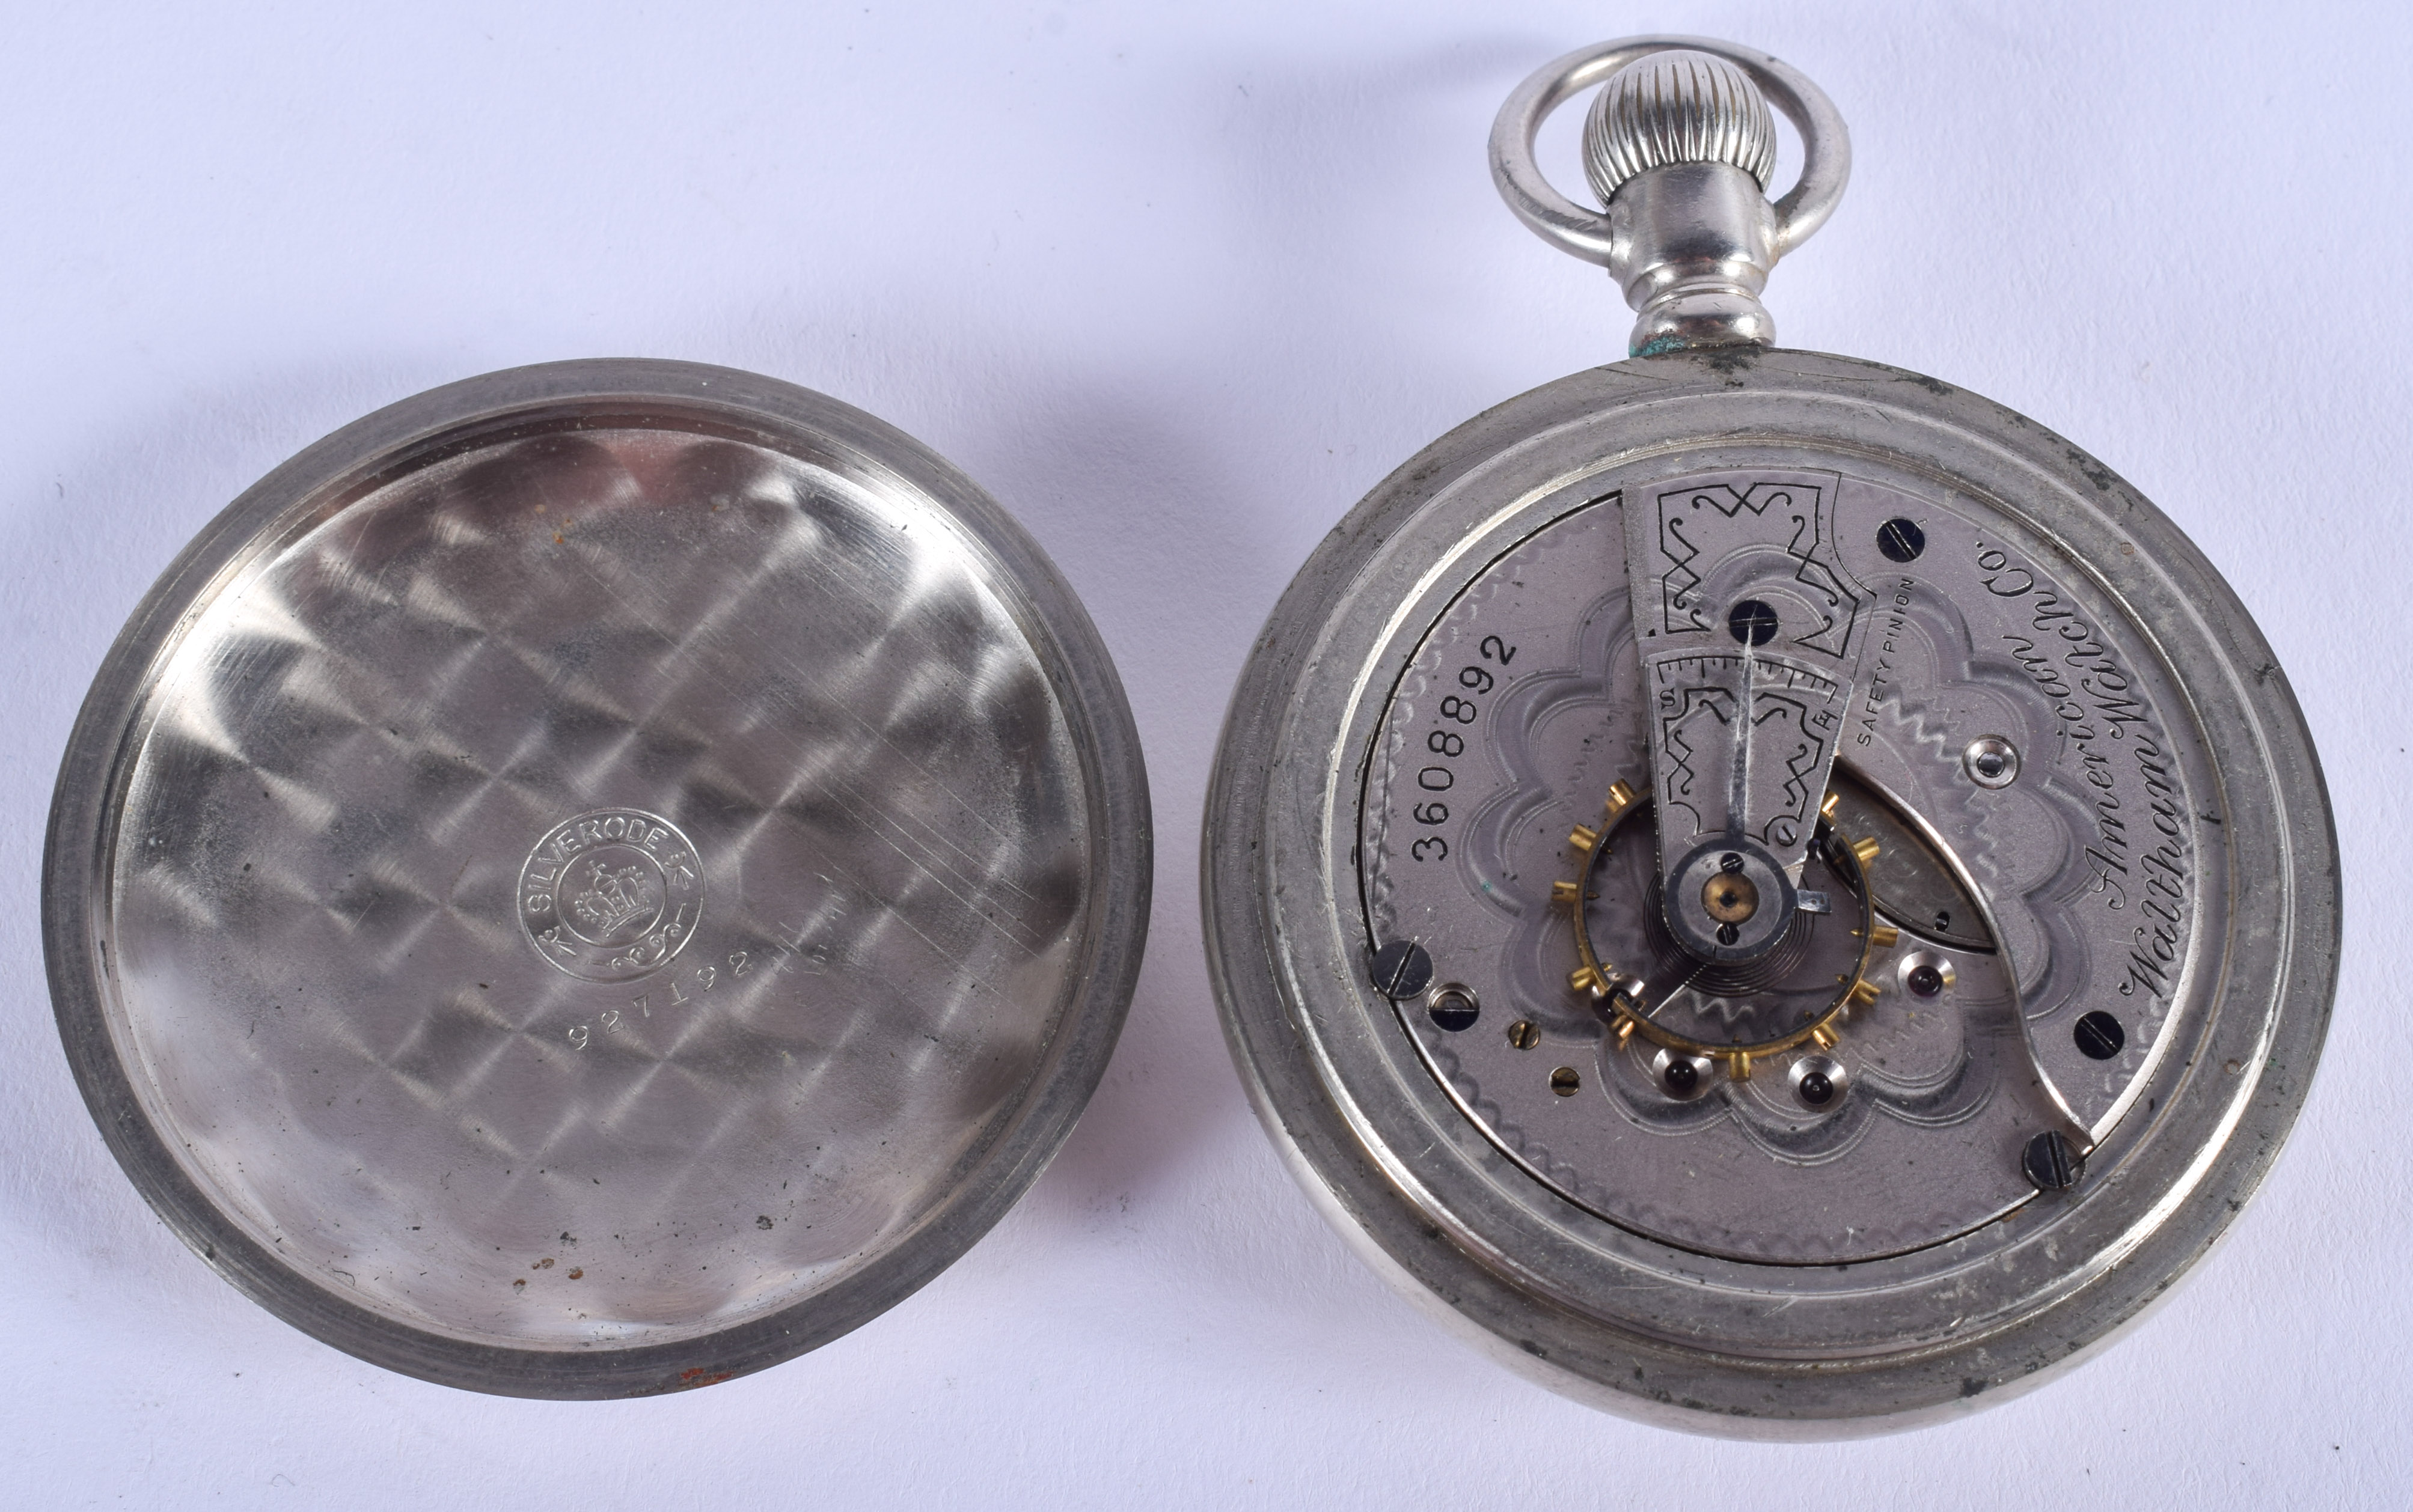 AN ANTIQUE POCKET WATCH. 5.25 cm wide. - Image 3 of 3